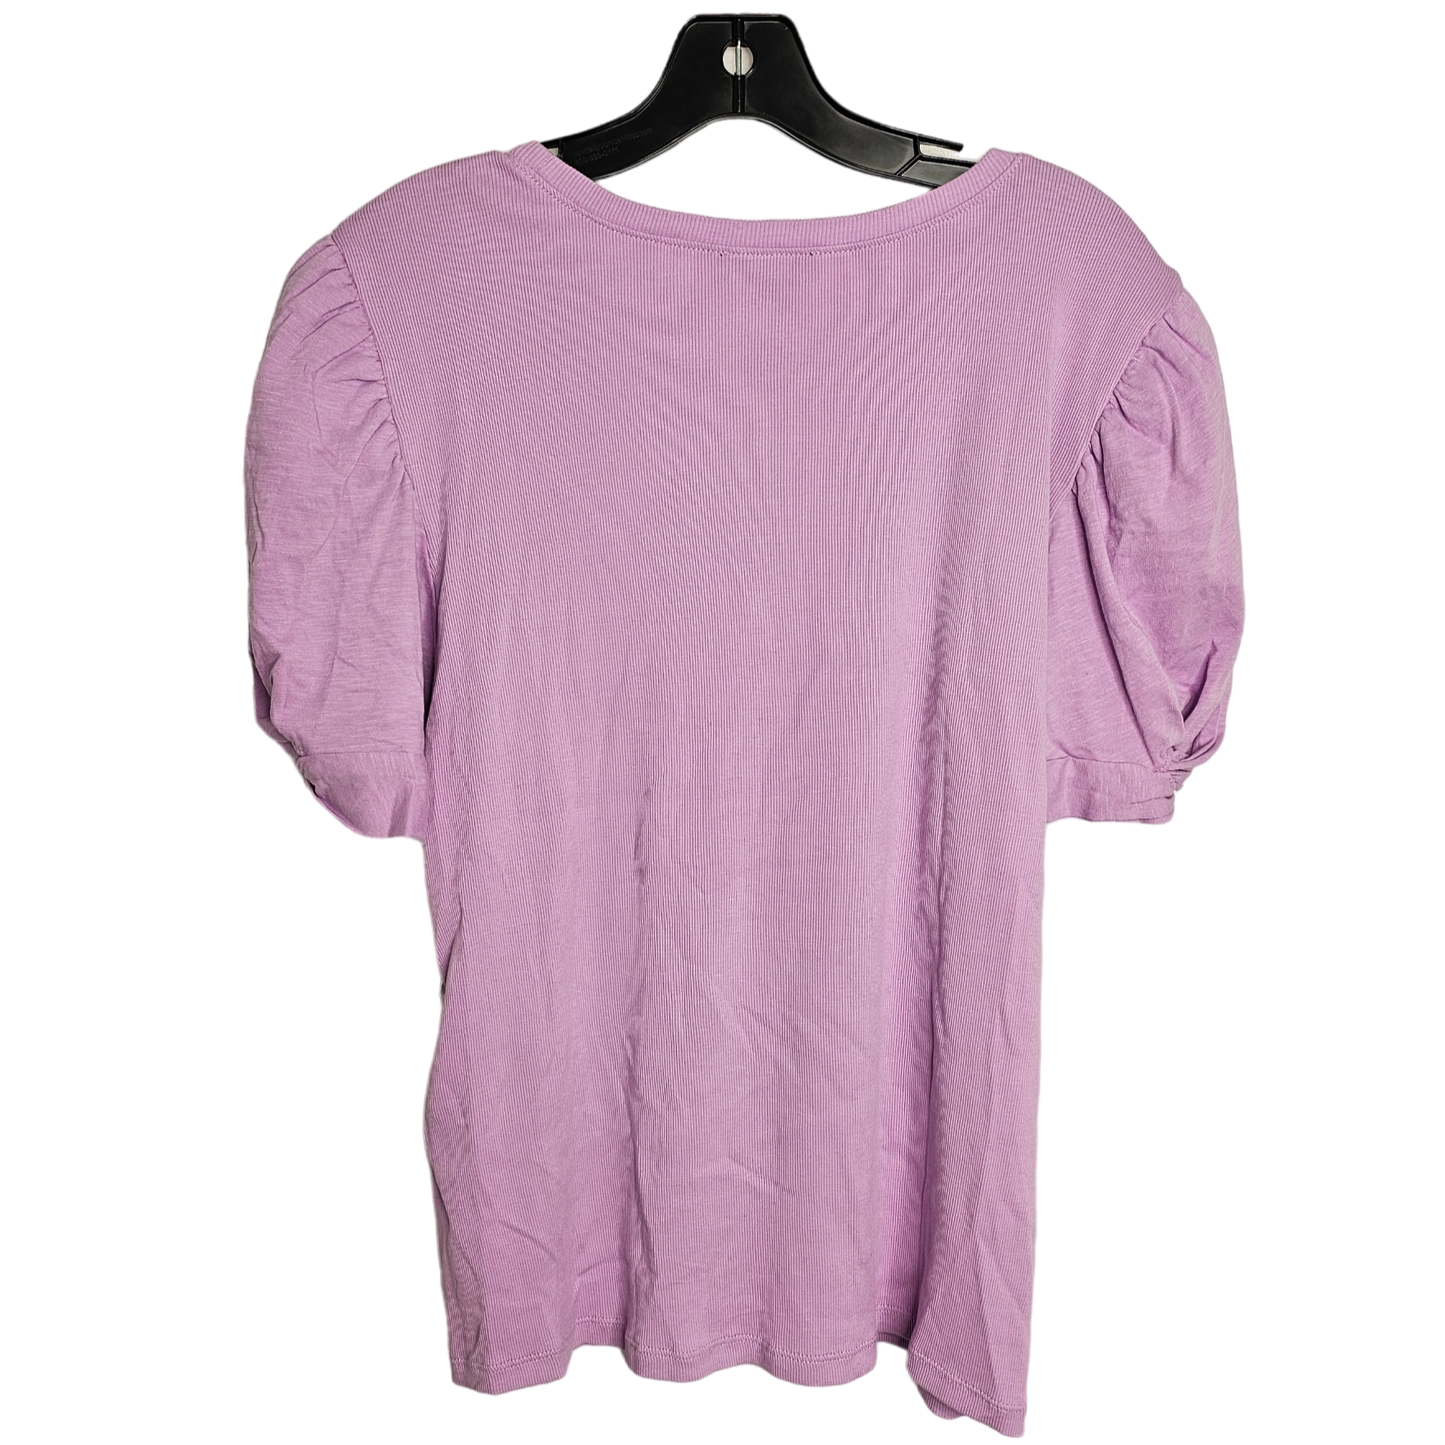 Purple Top Short Sleeve 1.state, Size Xl